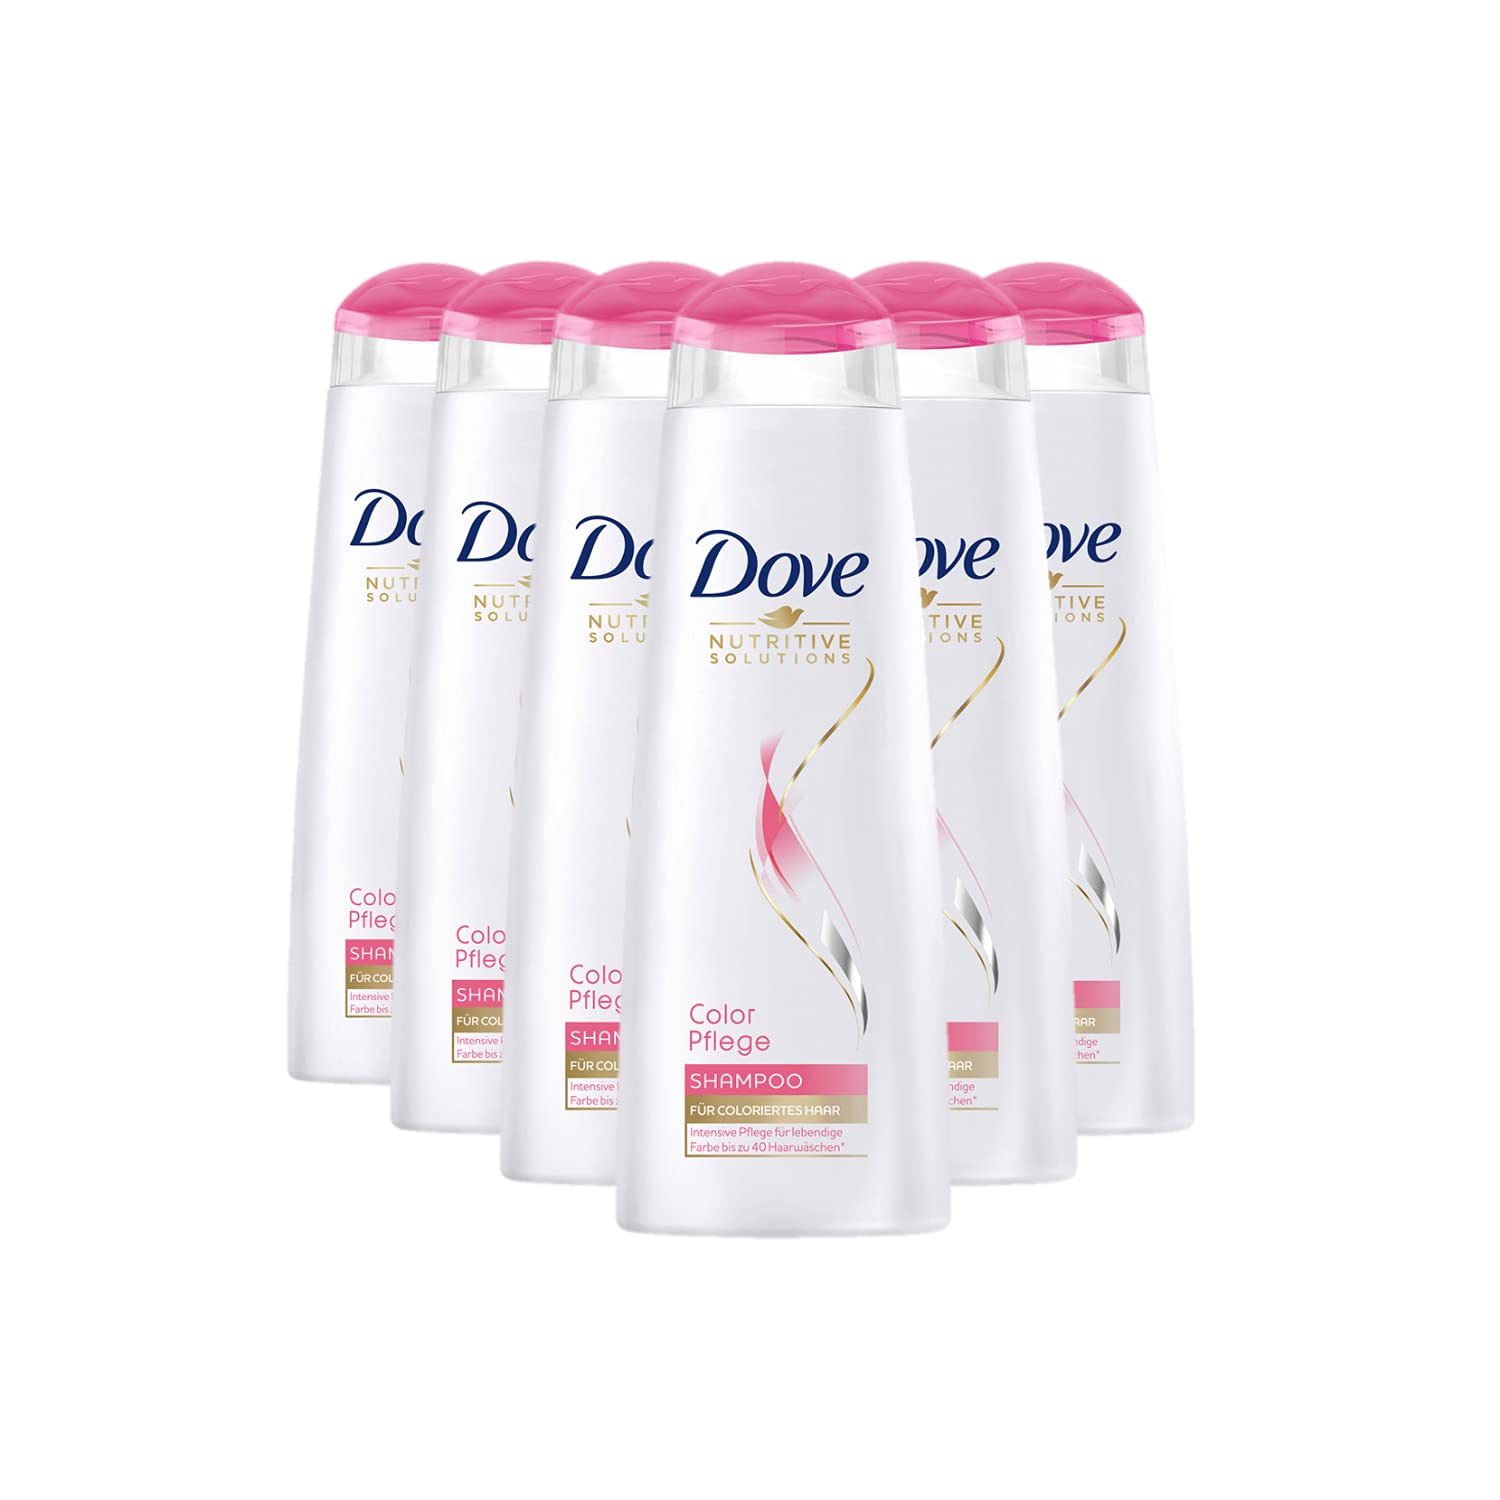 Dove Color Care Hair Care Shampoo, Pack of 6 (6 x 250 ml)